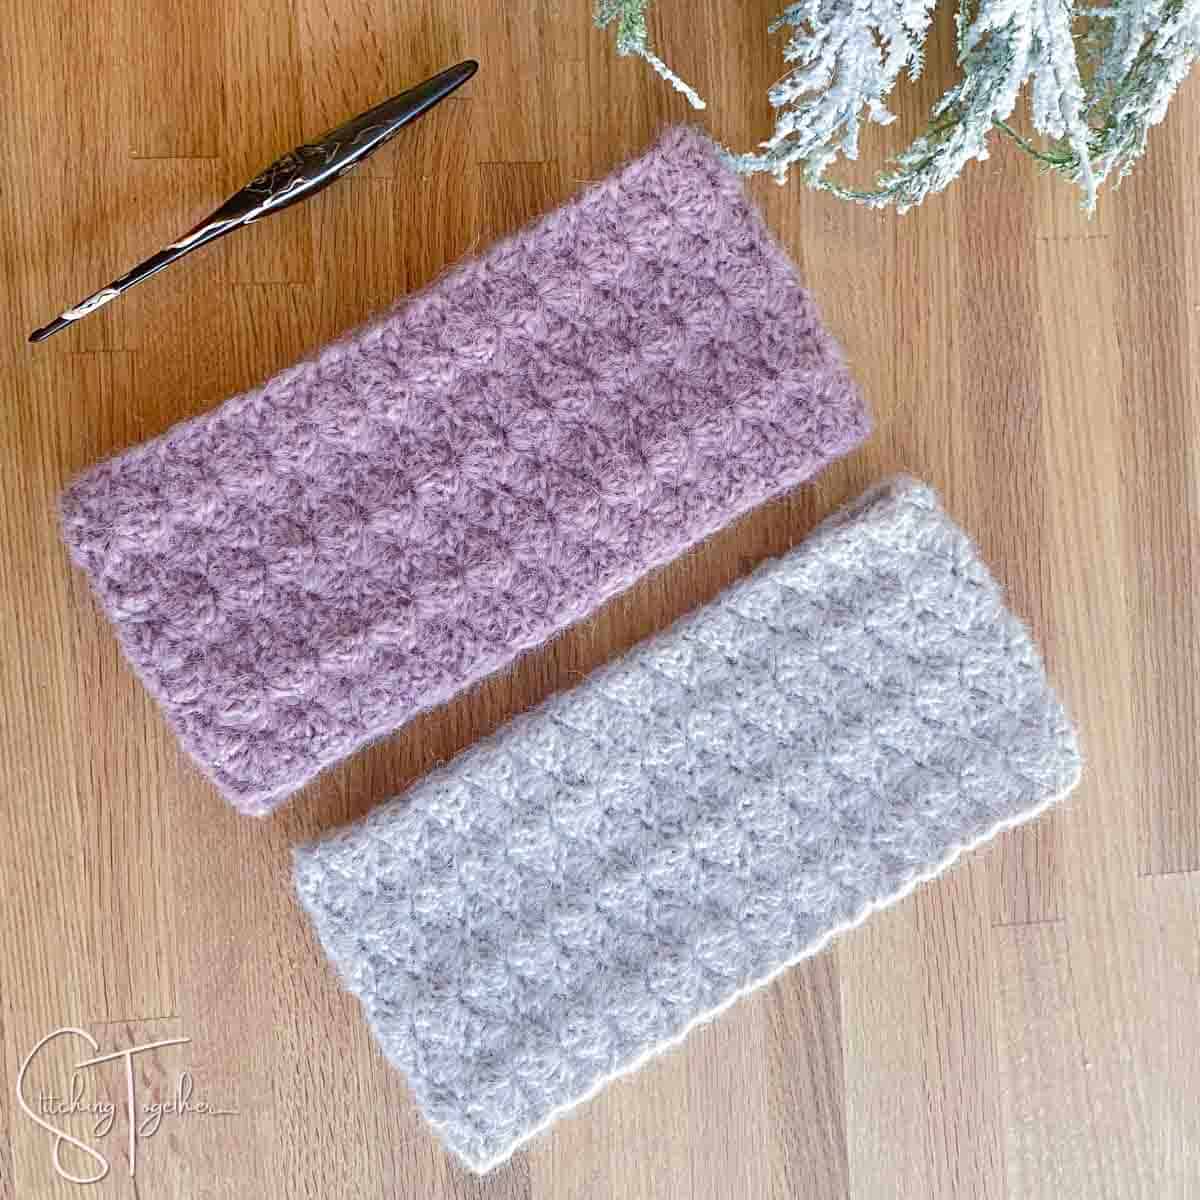 two shell stitch crochet ear warmers laying next to each other with a crochet hook and greenery